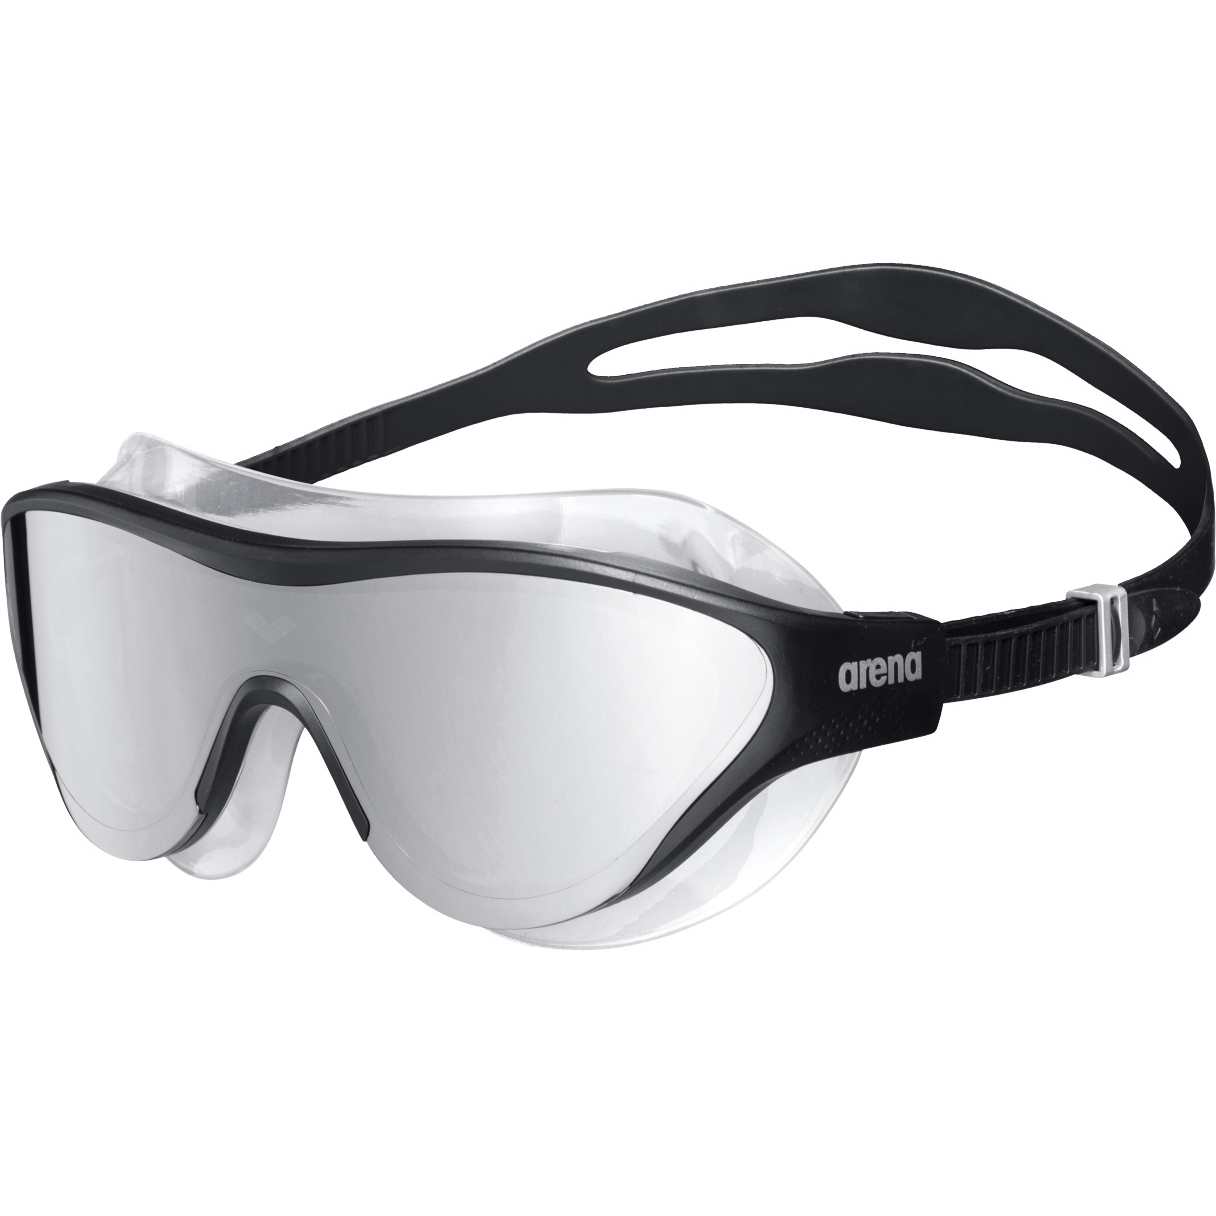 Picture of arena The One Mask Mirror Swimming Goggles - Silver - Black/Black